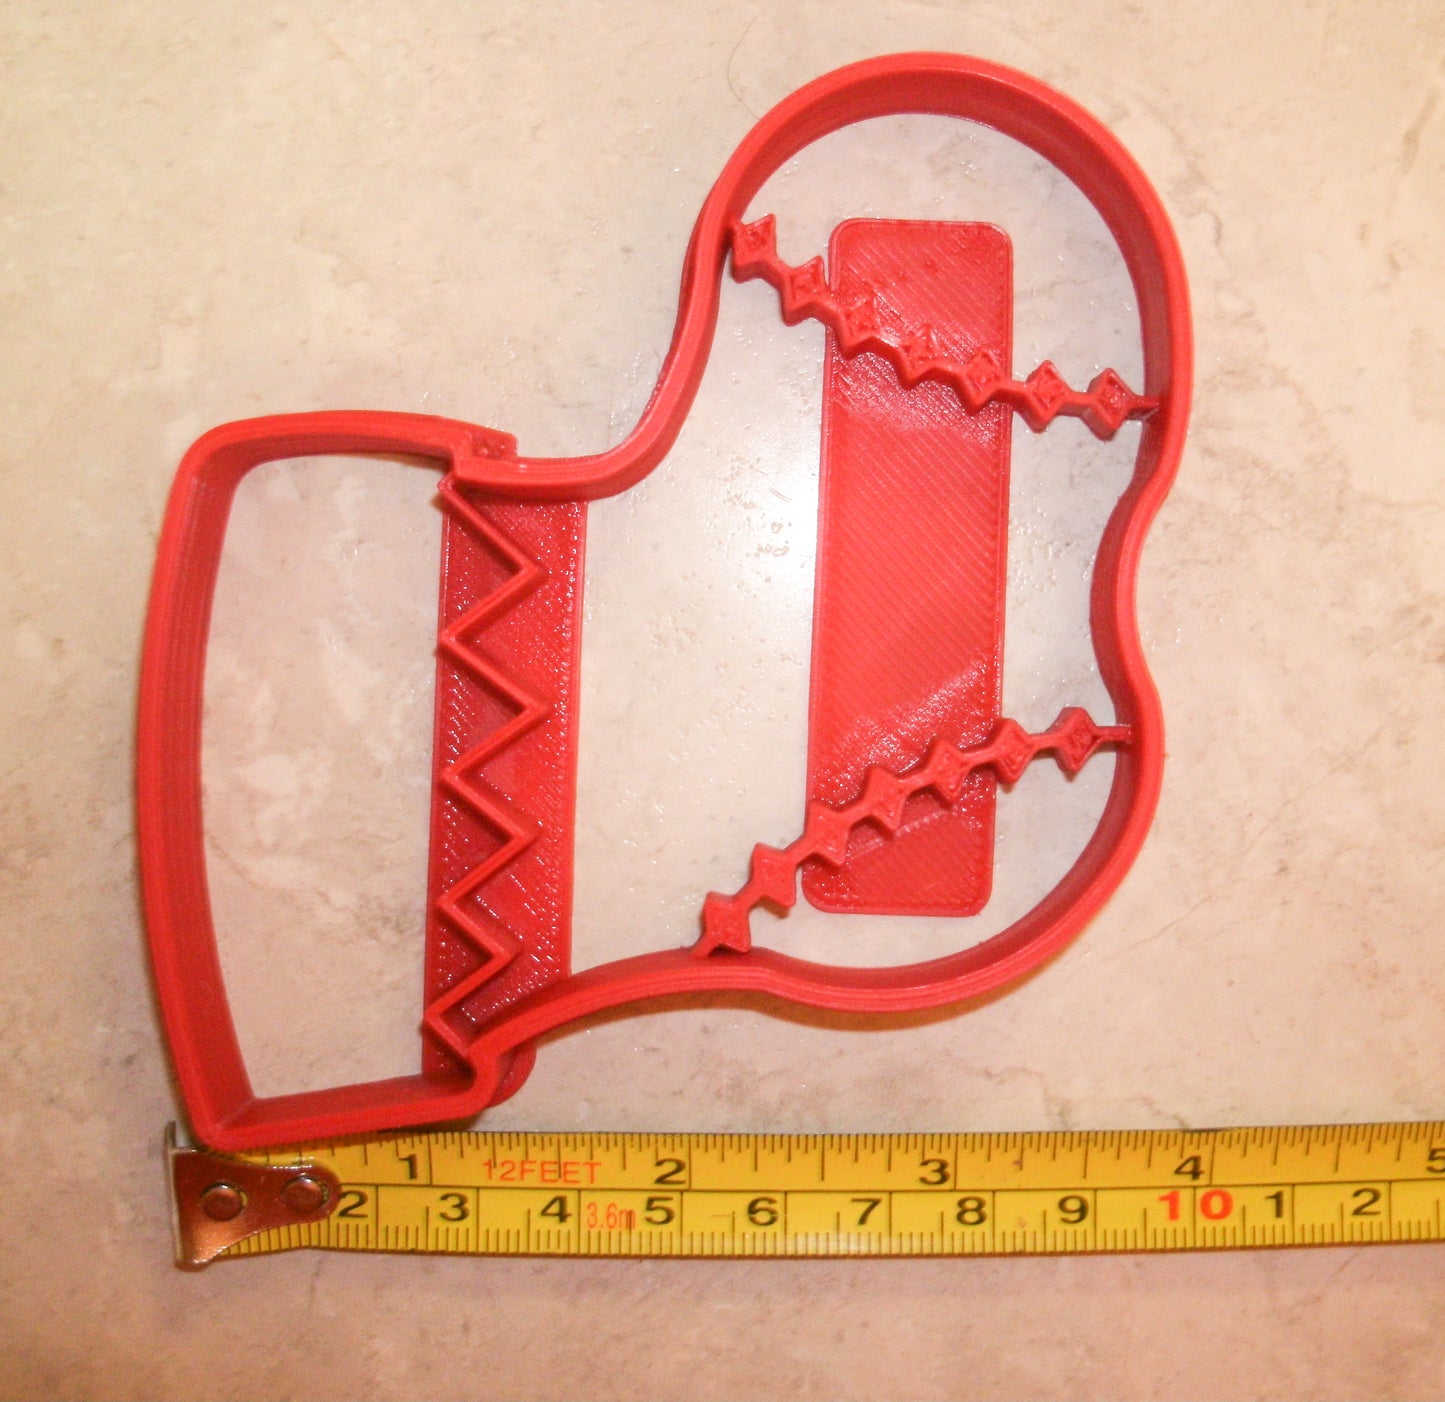 Stocking Christmas Gift Santa Cookie Cutter 3D Printed Made in USA PR122